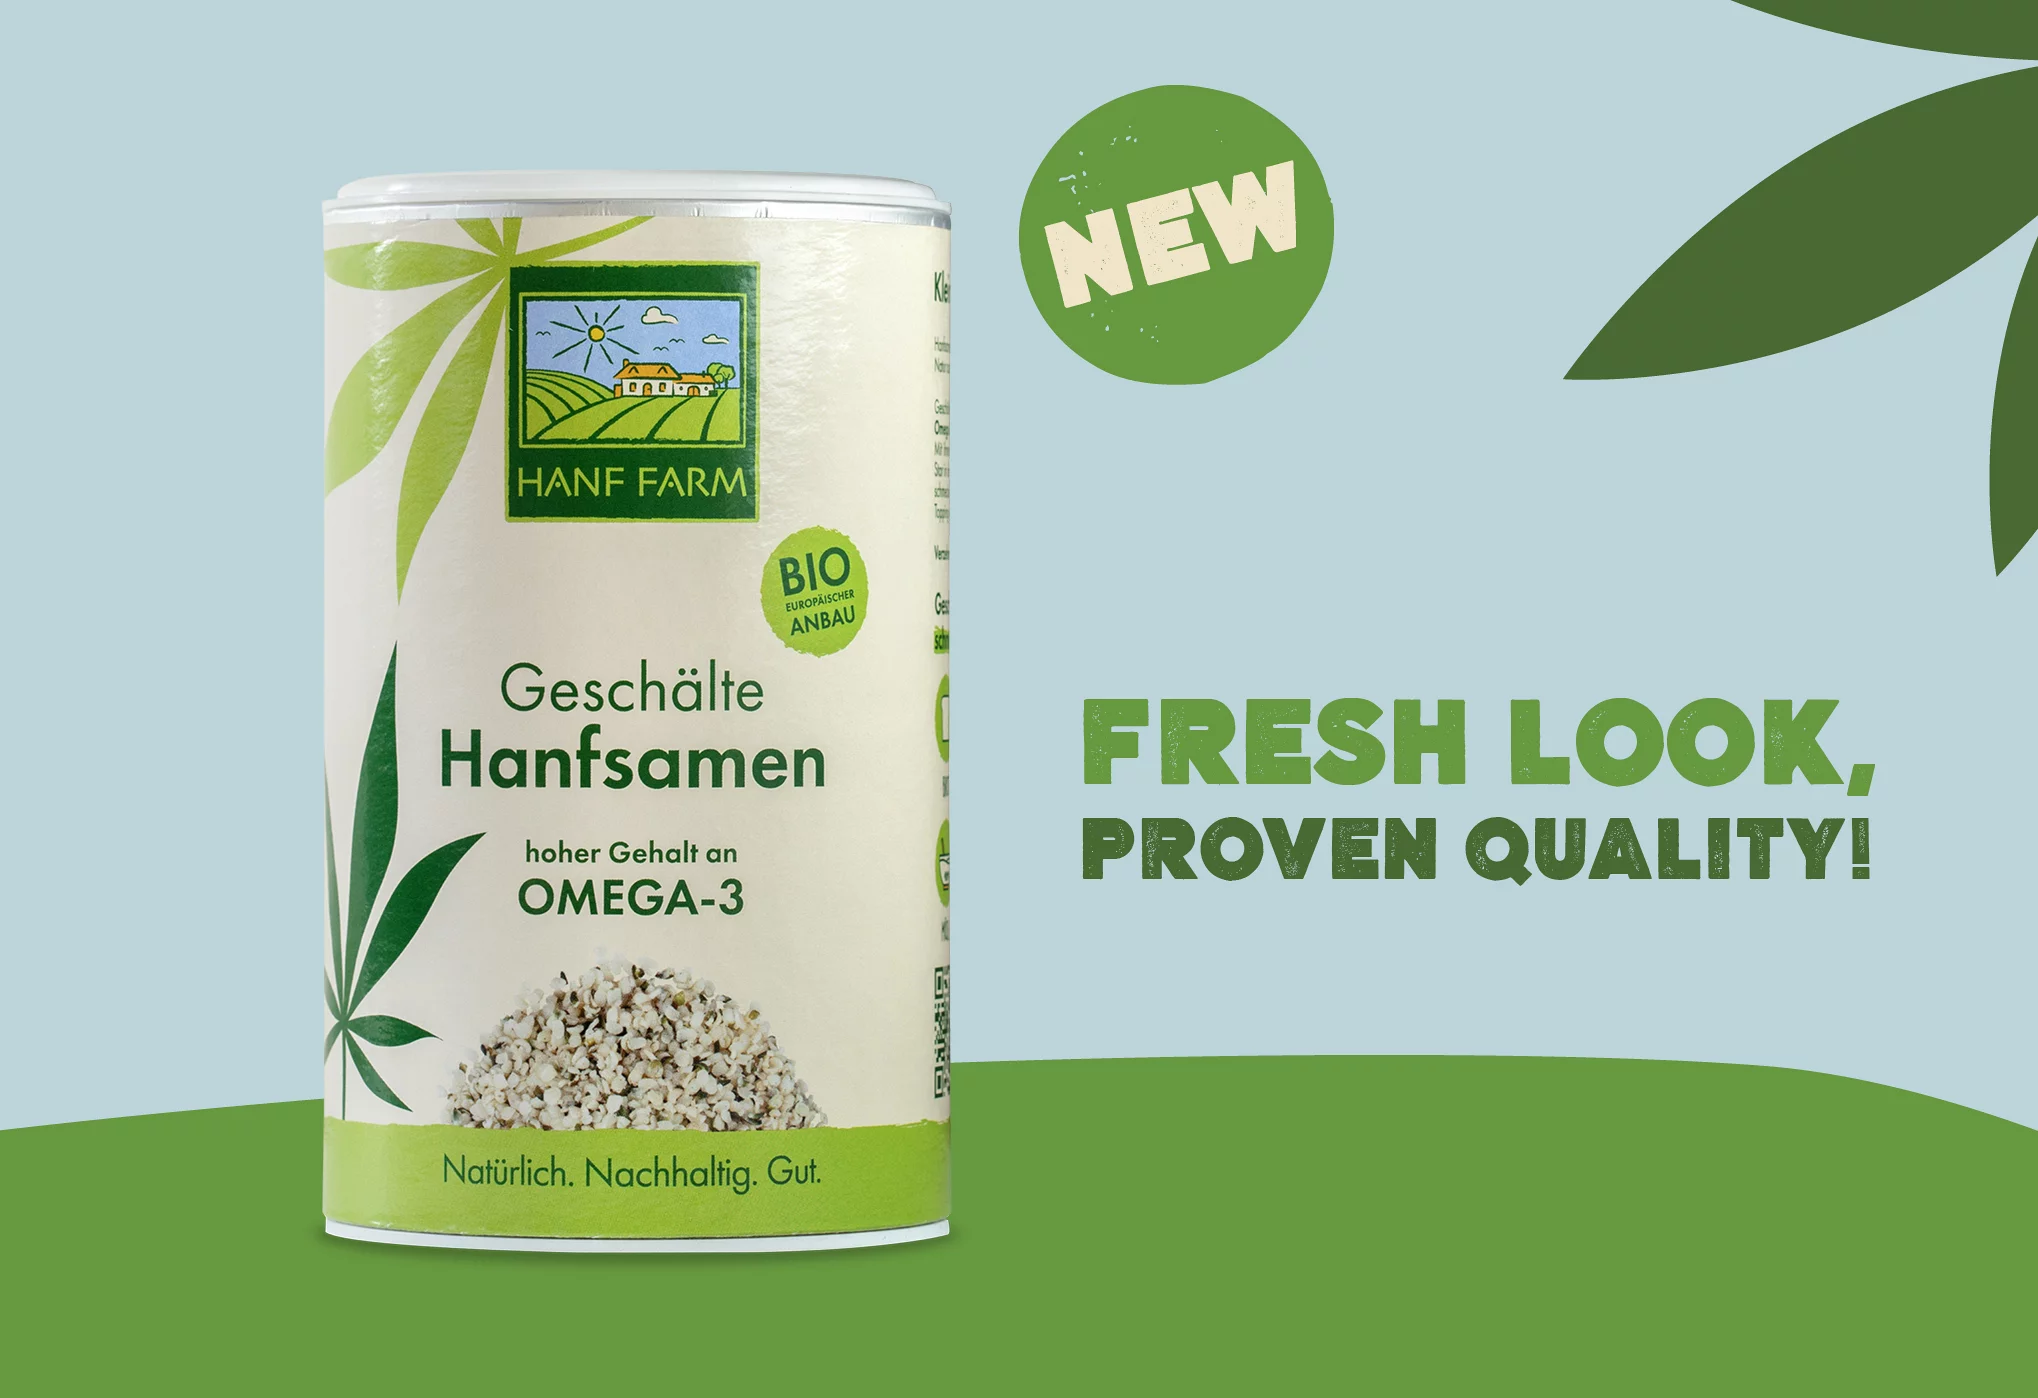 Fresh look, familiar quality!
Discover our organic hulled hemp seeds in a new design! Hulled hemp seeds are a natural source of omega-3 fatty acids, fibre and protein and, with their mild nutty flavour, are perfect as an ingredient or topping for dishes such as muesli, pesto and smoothies.